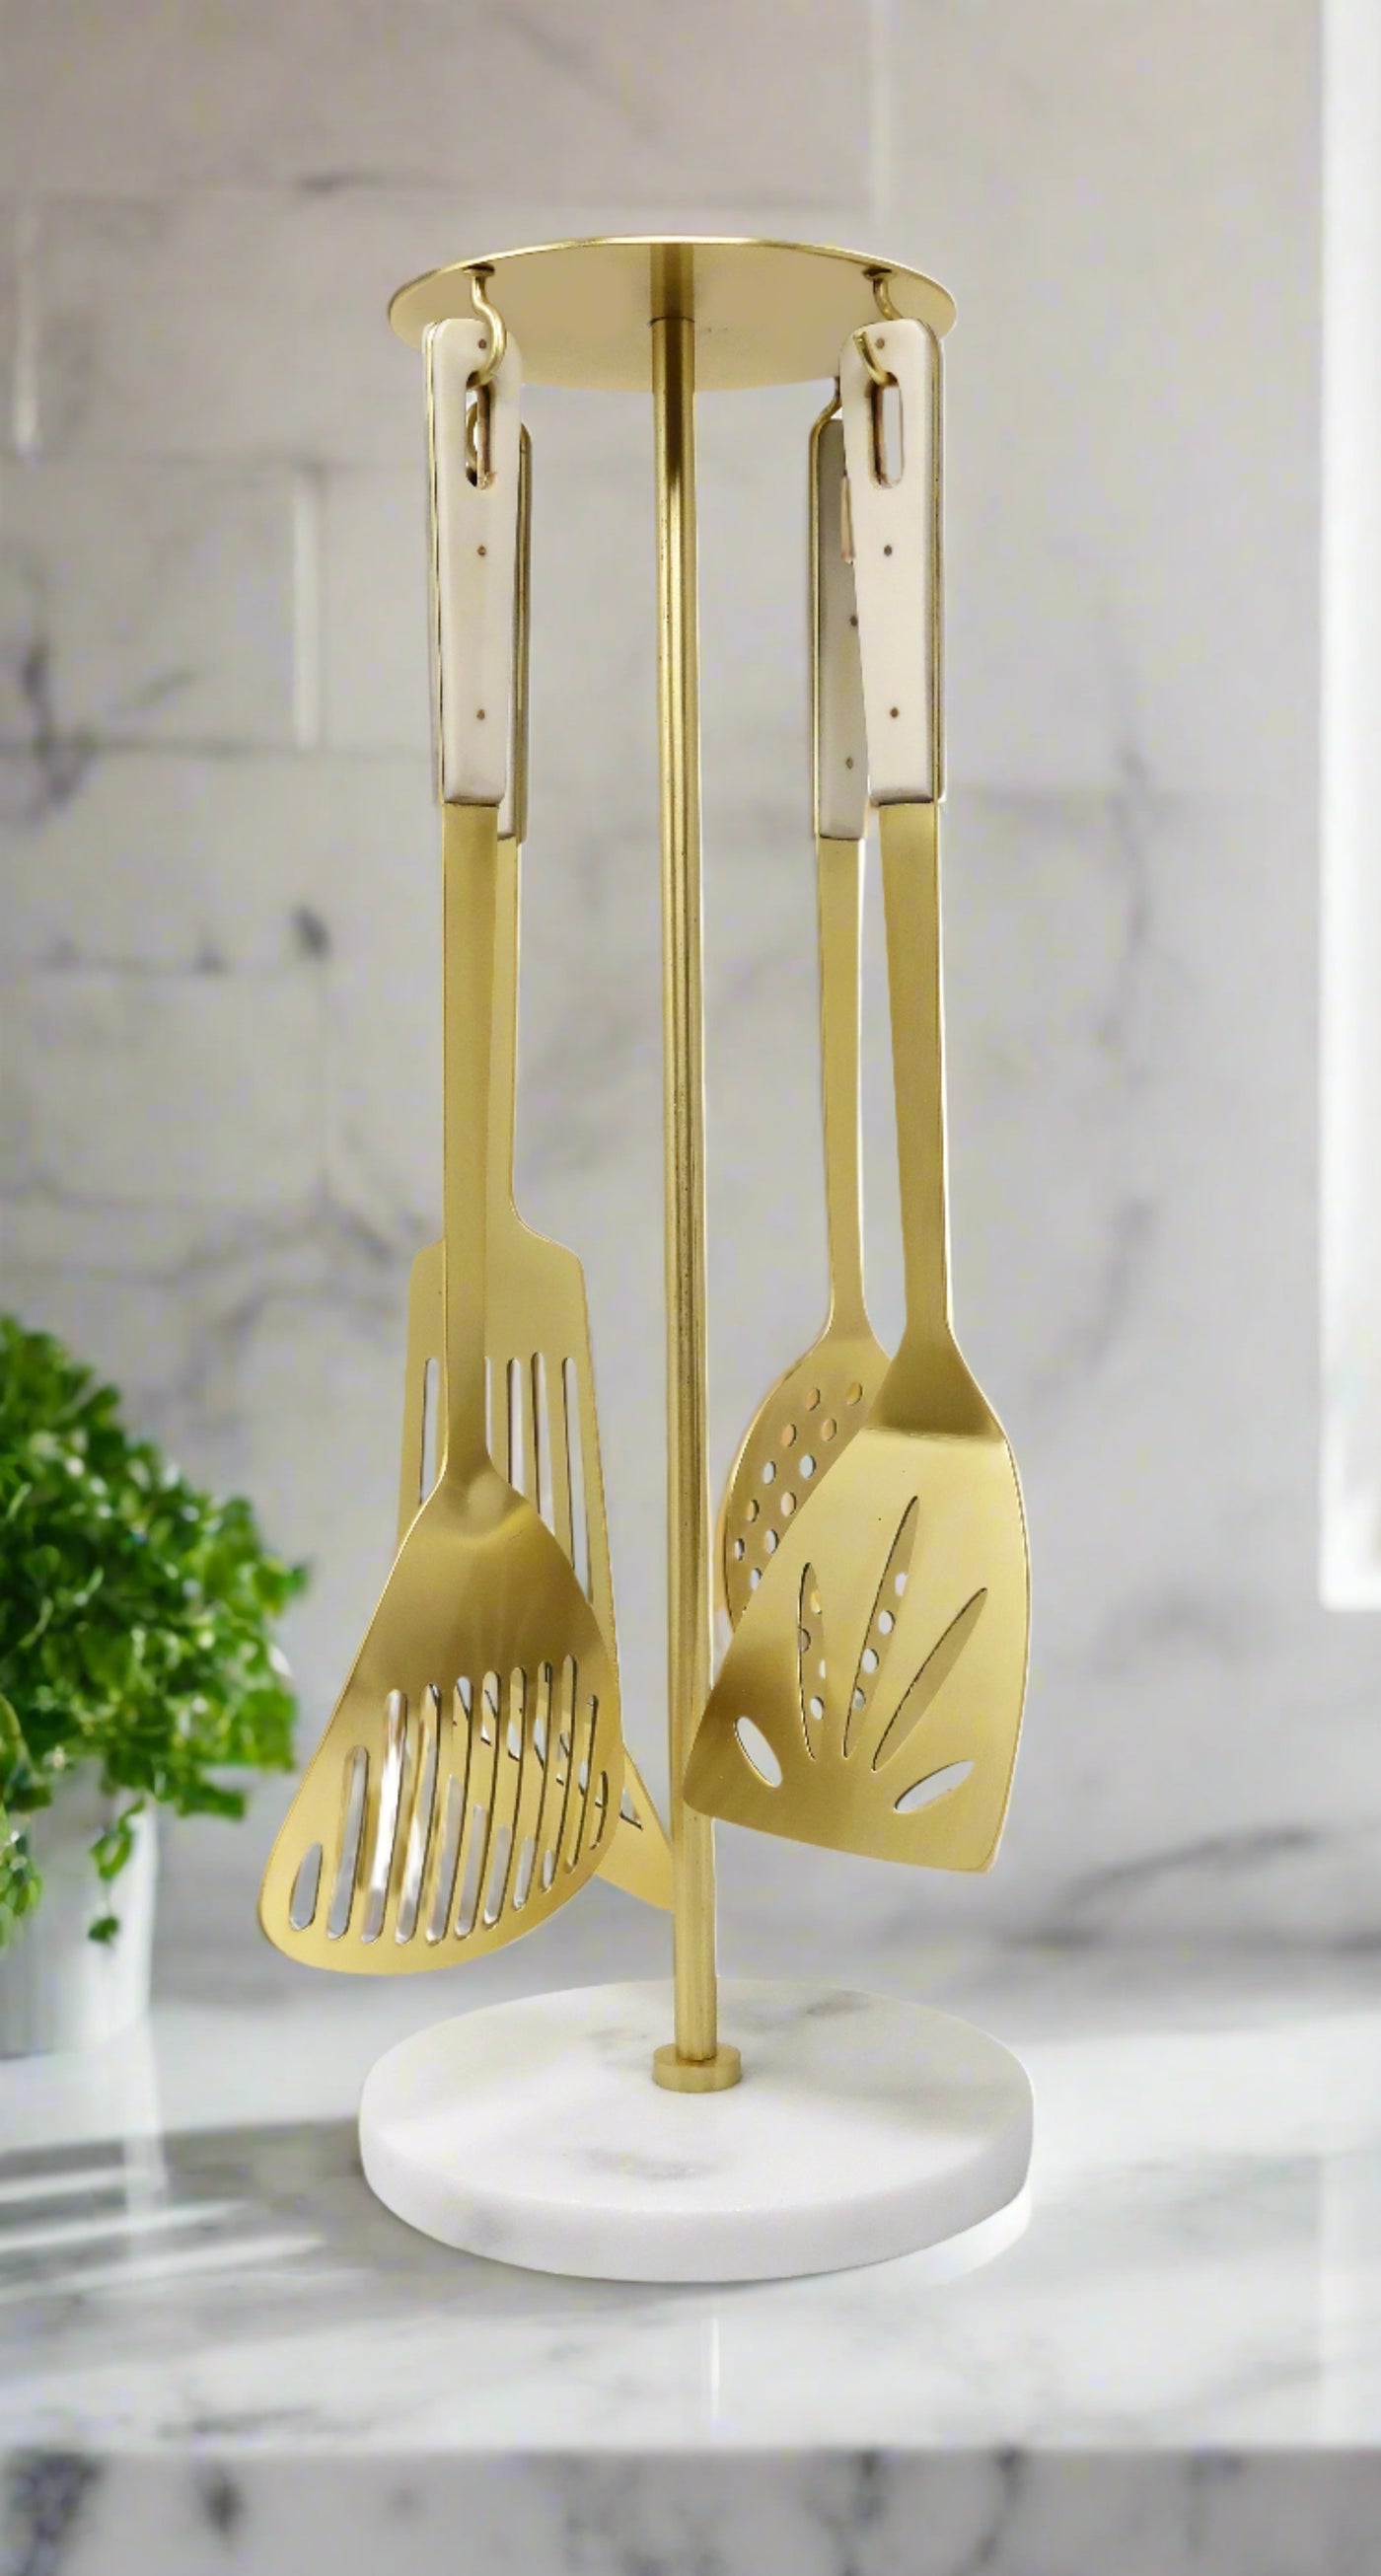 Set of 4 Serving Utensils Gold with Marble Handles